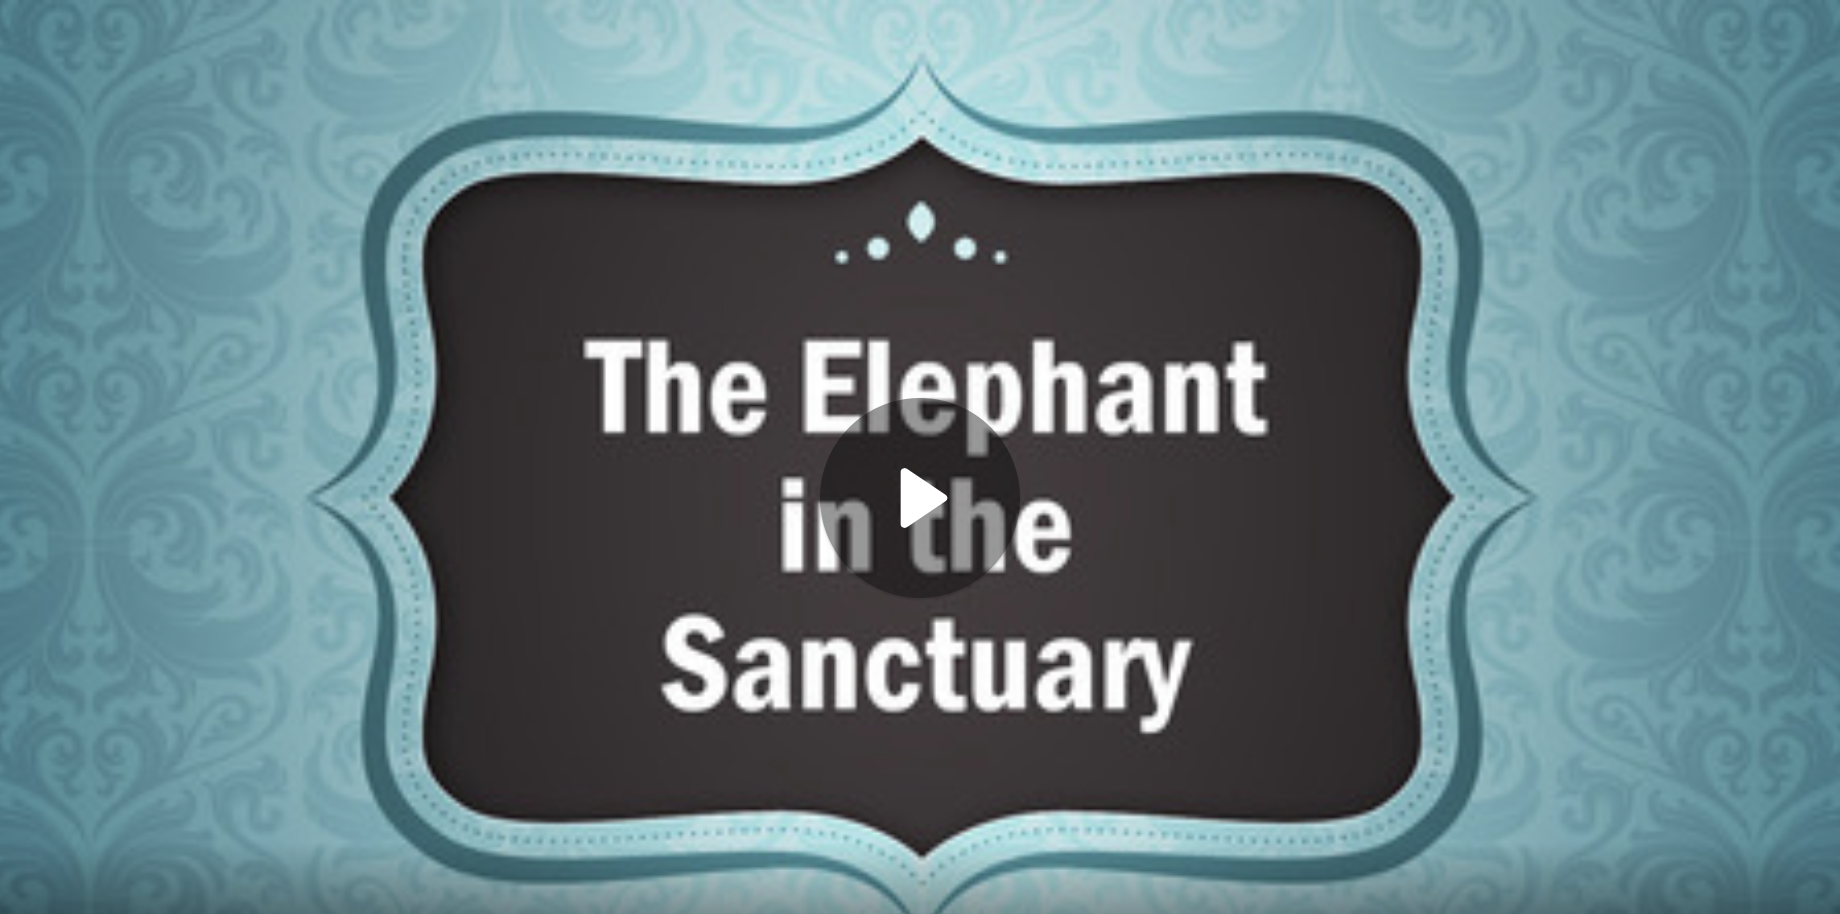 The Elephant in the Sanctuary